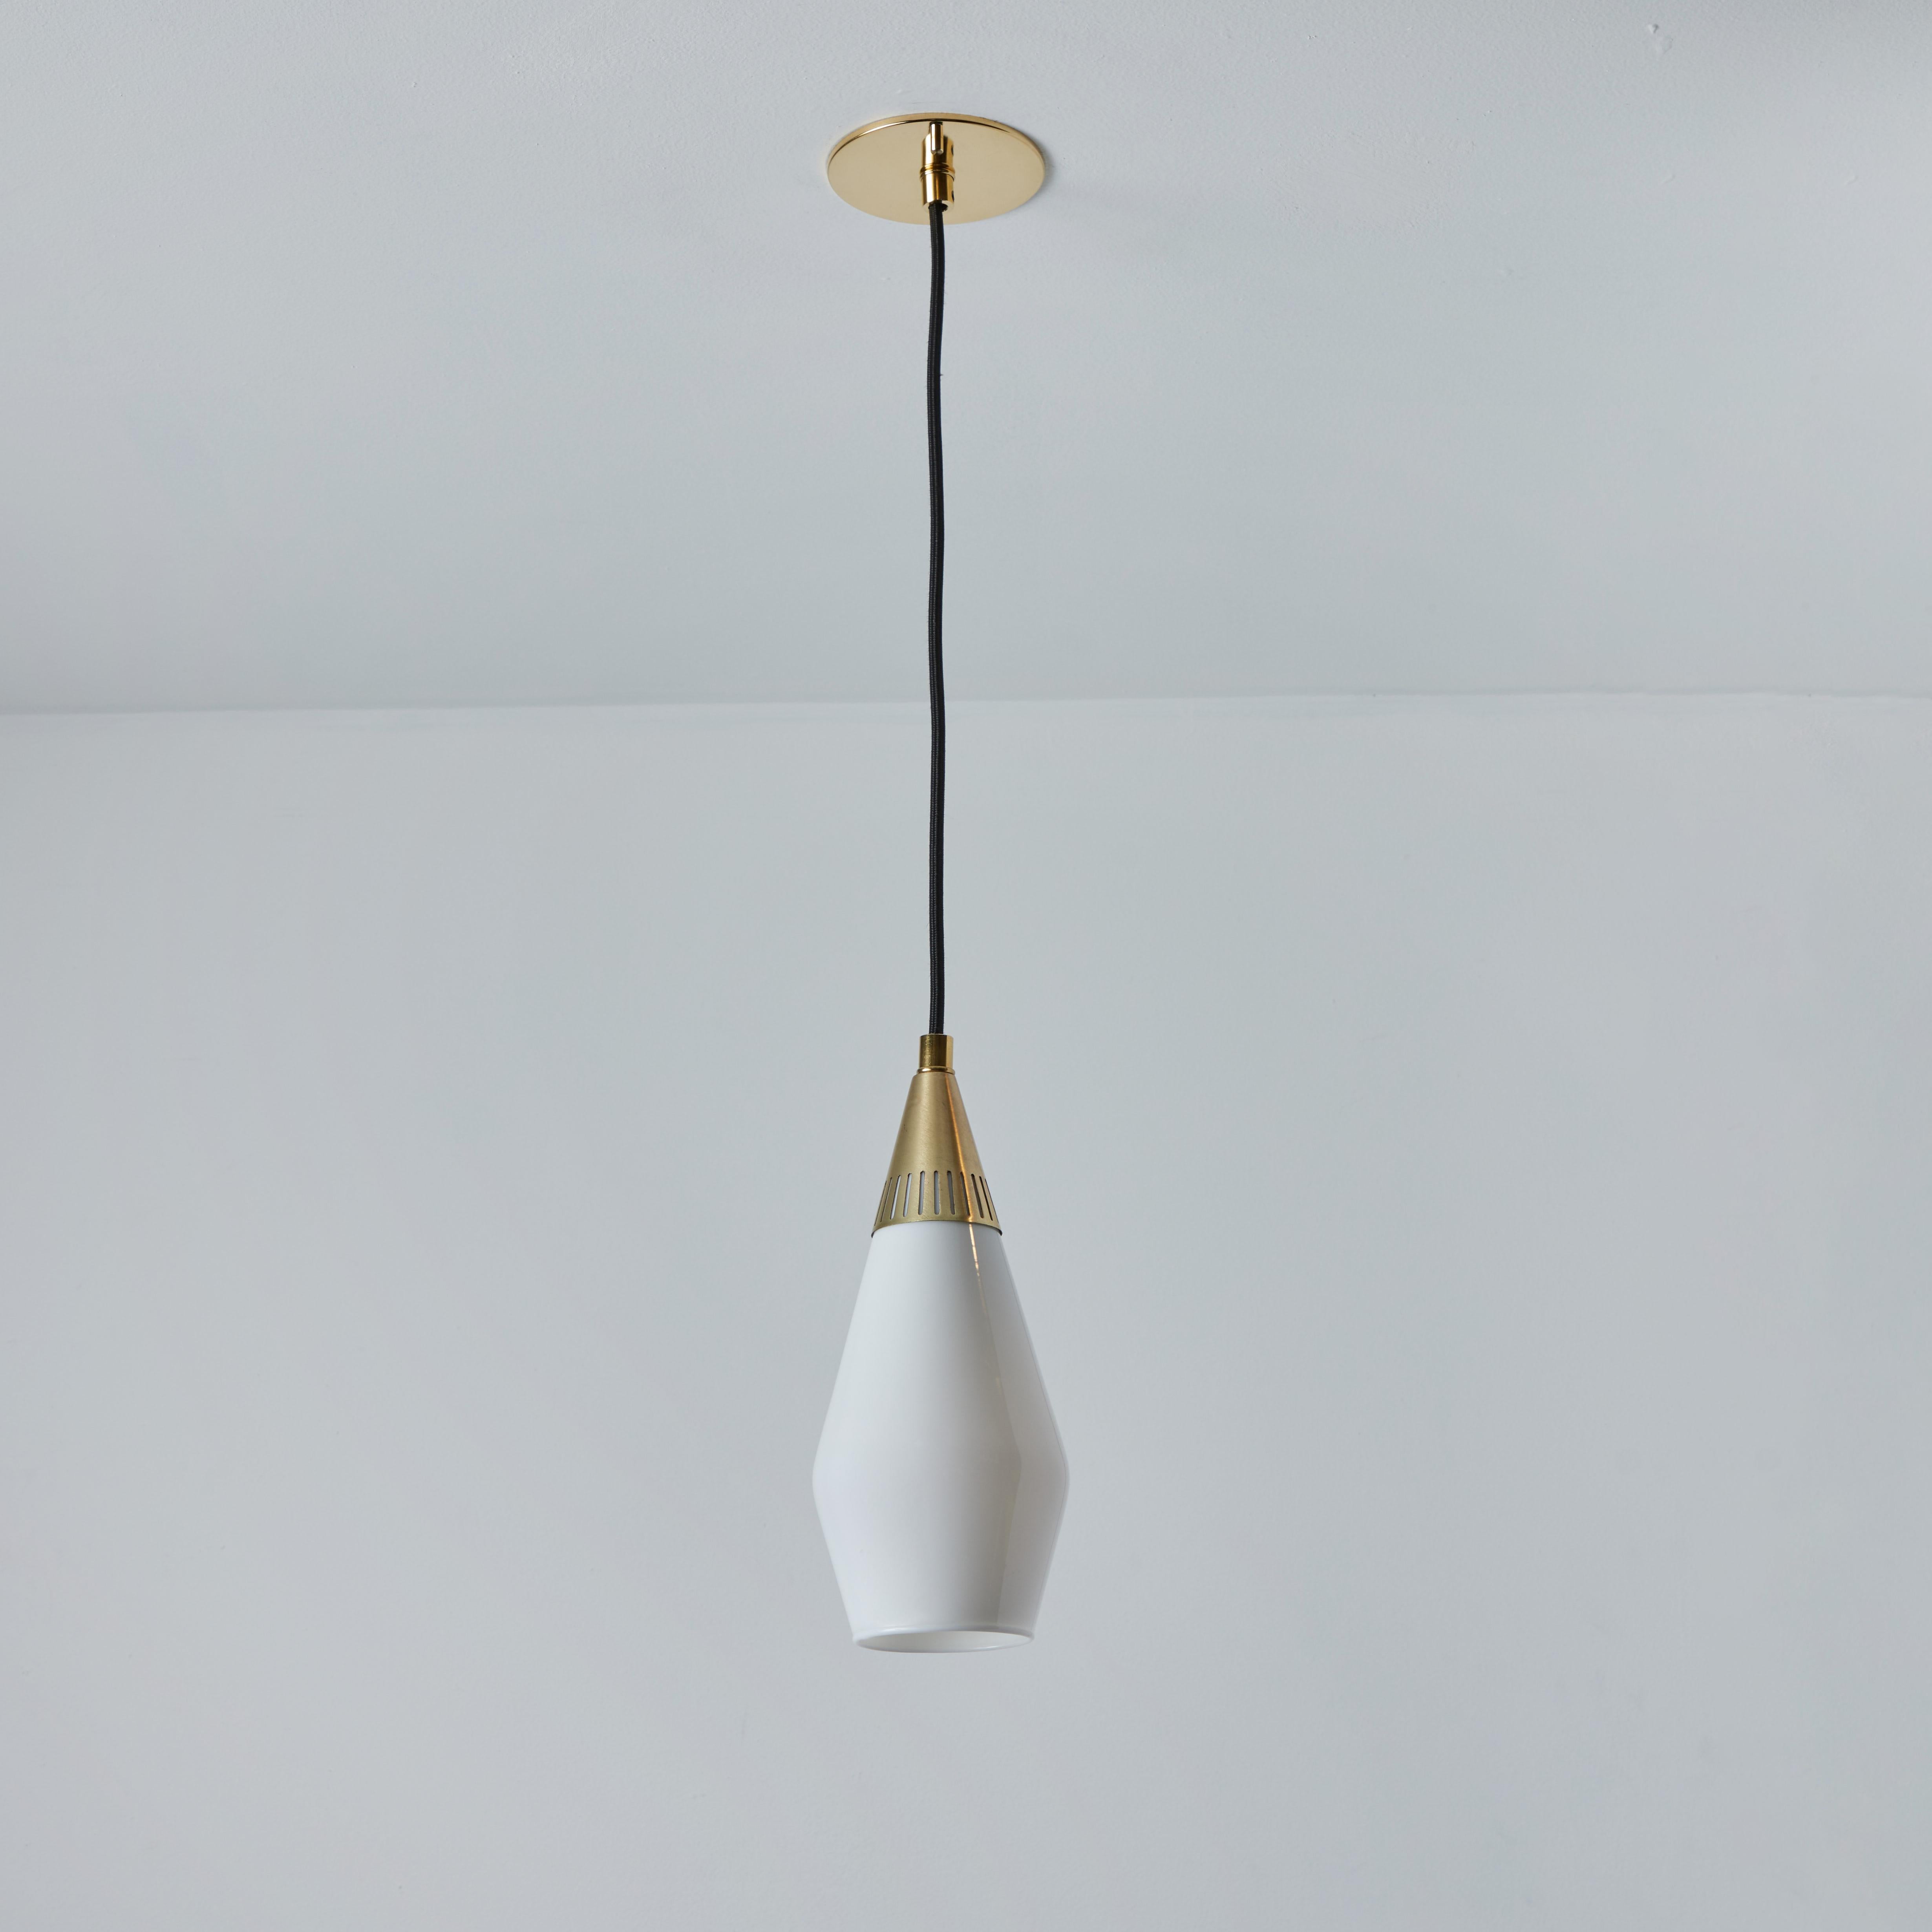 1960s Opaline Glass and Brass Geometric Pendant Lamp Attributed to Mauri Almari For Sale 2